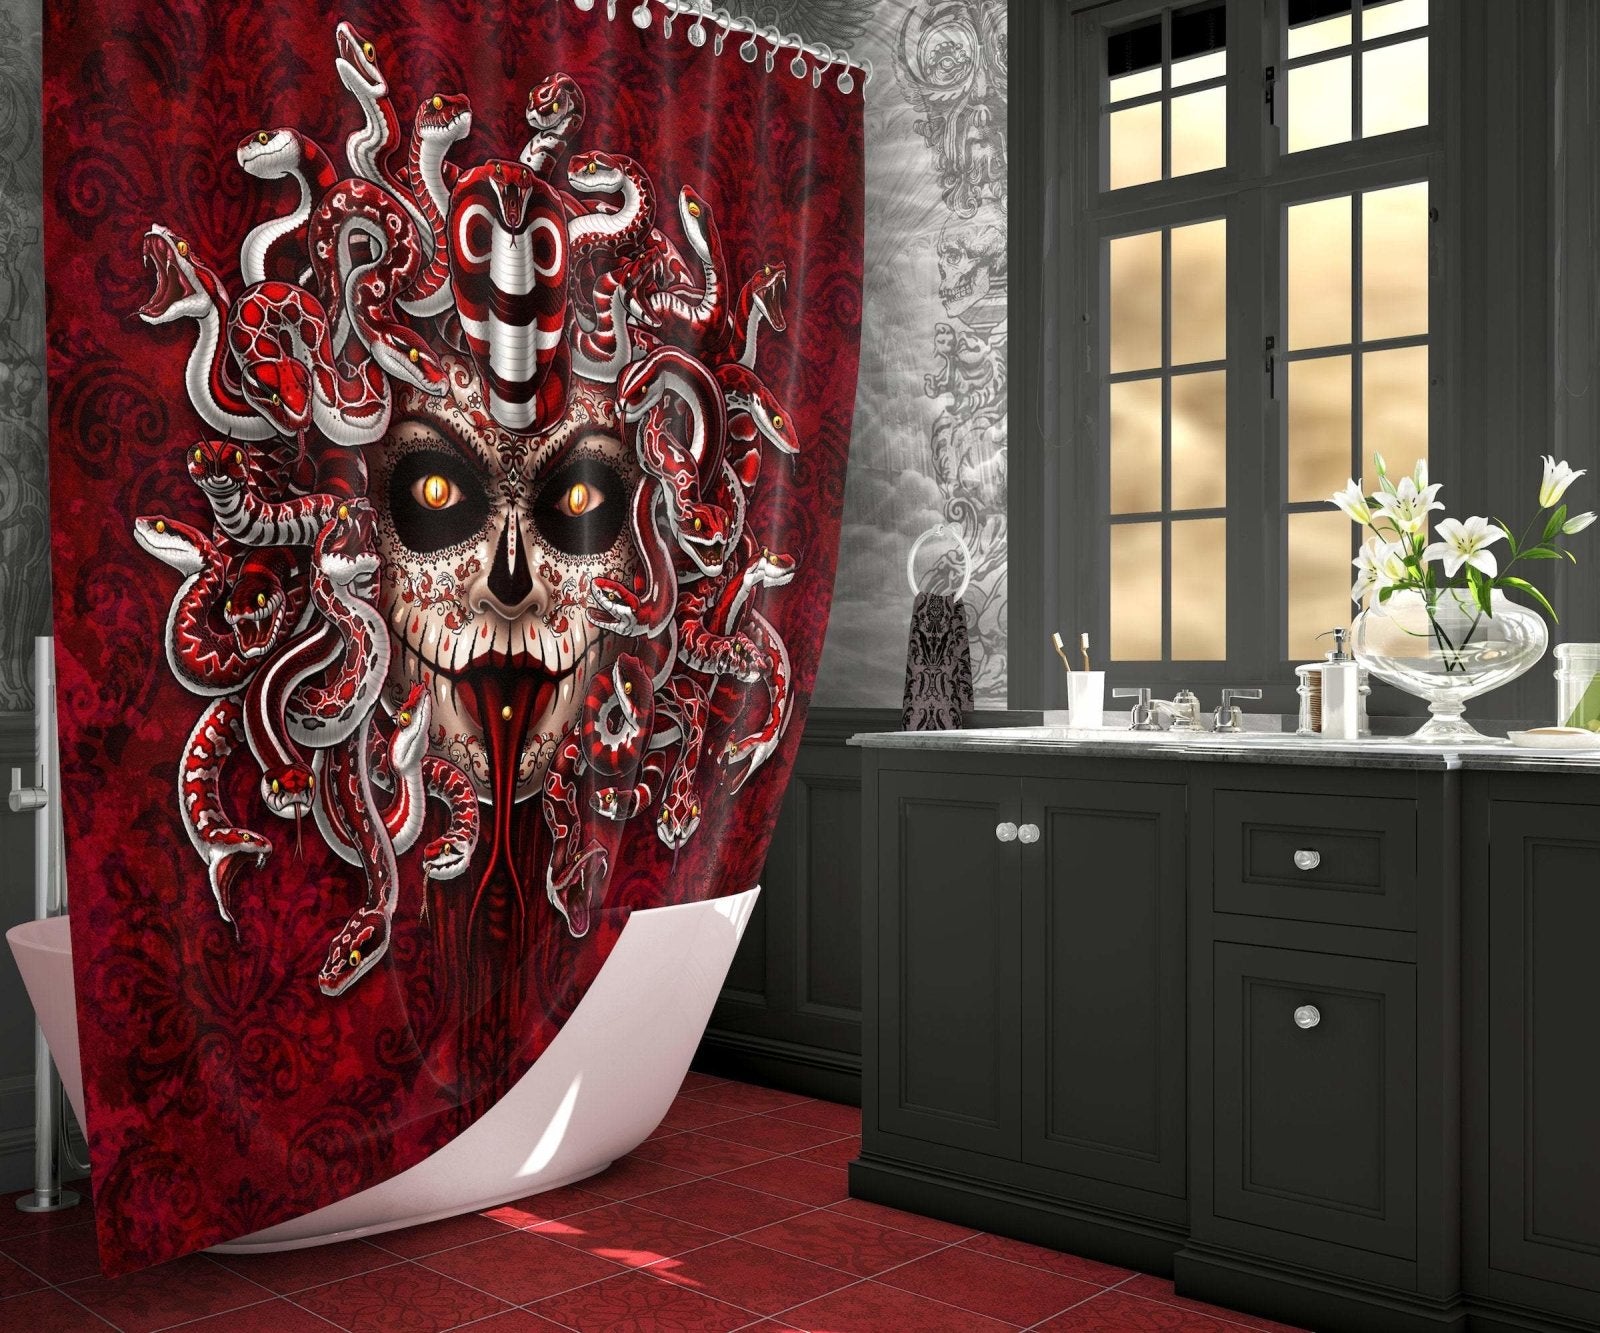 Catrina Shower Curtain, Dia de los Muertos, Day of the Dead, Mexican, Gothic Bathroom Decor - Medusa, Mocking, Red & White Snakes - Abysm Internal